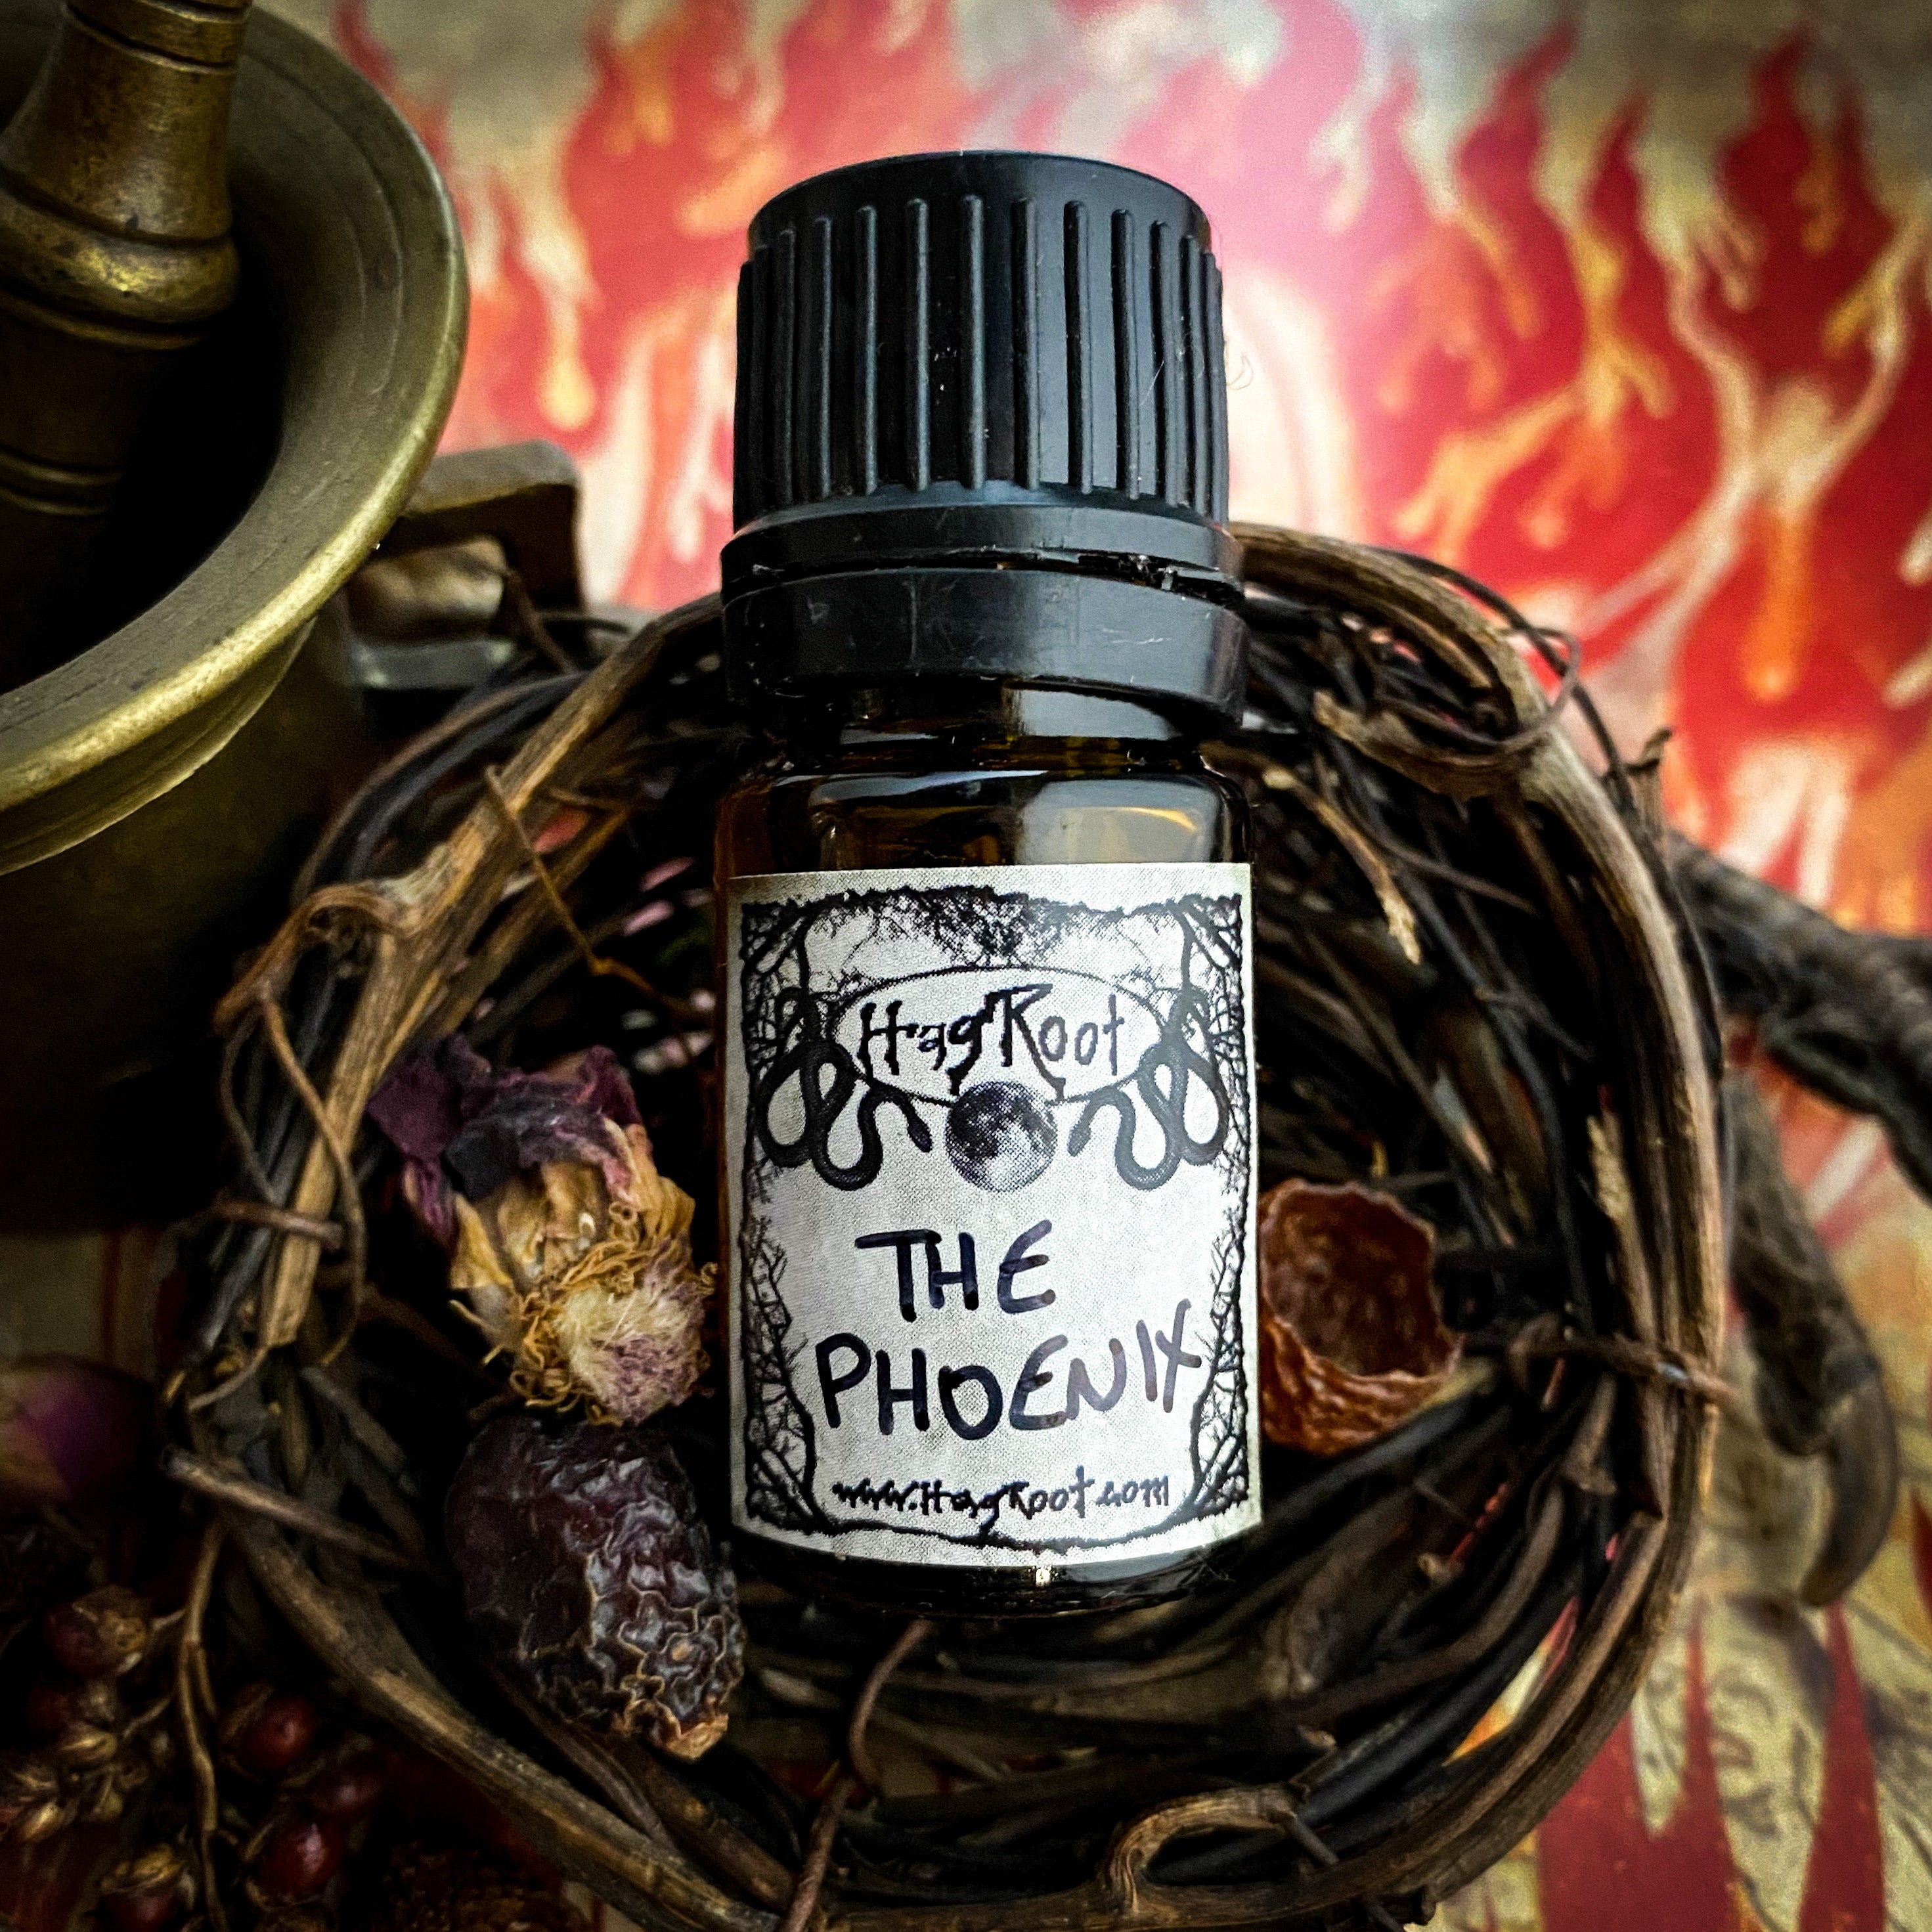 THE PHOENIX-(Blood Oranges, Golden Amber, Fiery Embers, Warm Spices)-Perfume, Cologne, Anointing, Ritual Oil